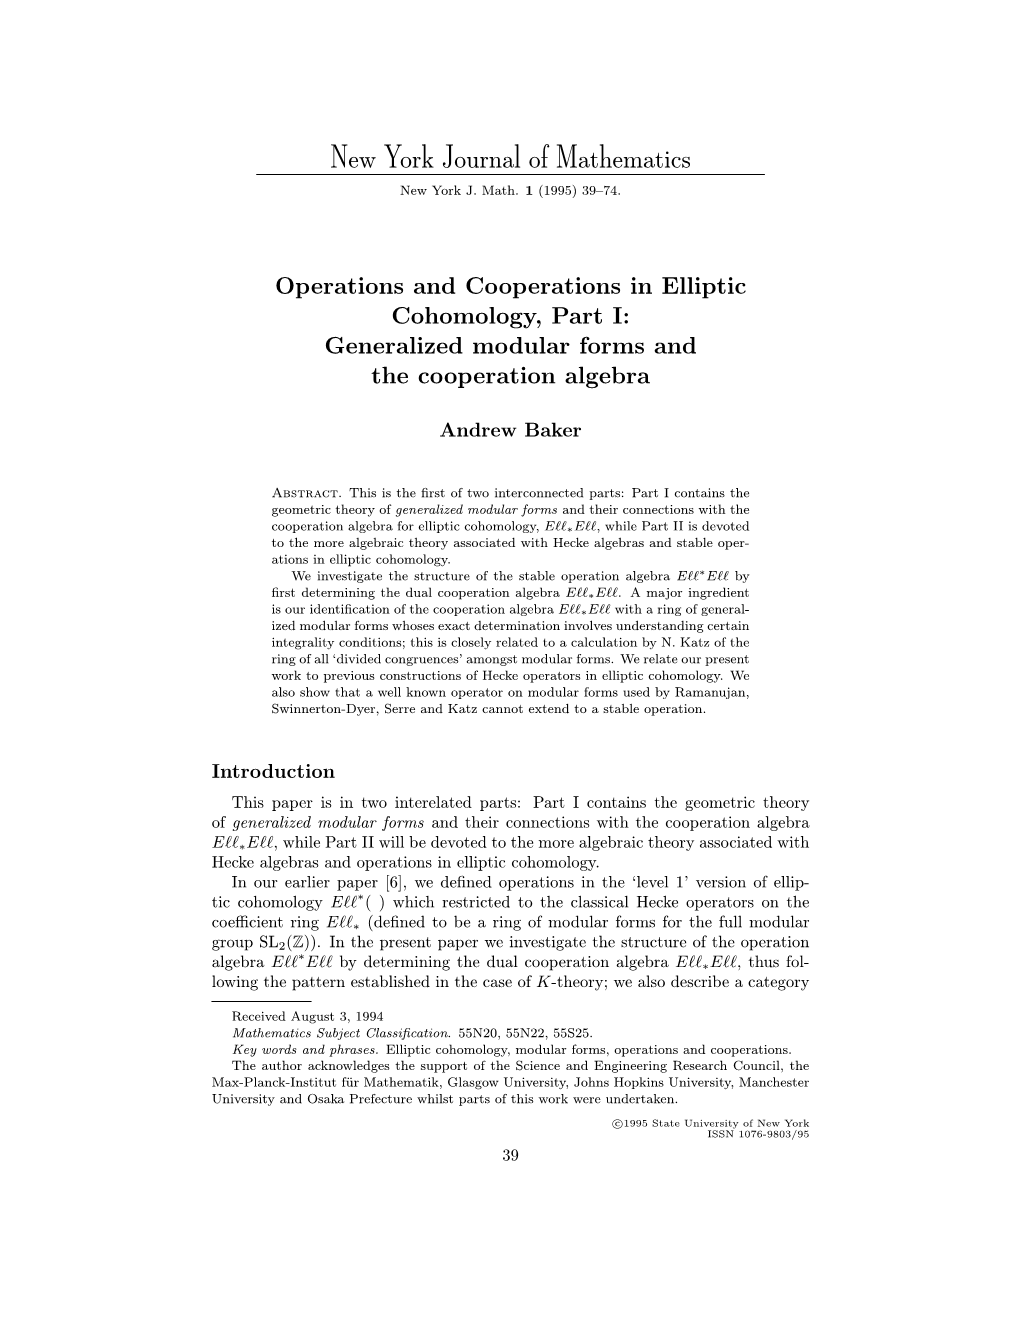 Generalized Modular Forms and the Cooperation Algebra